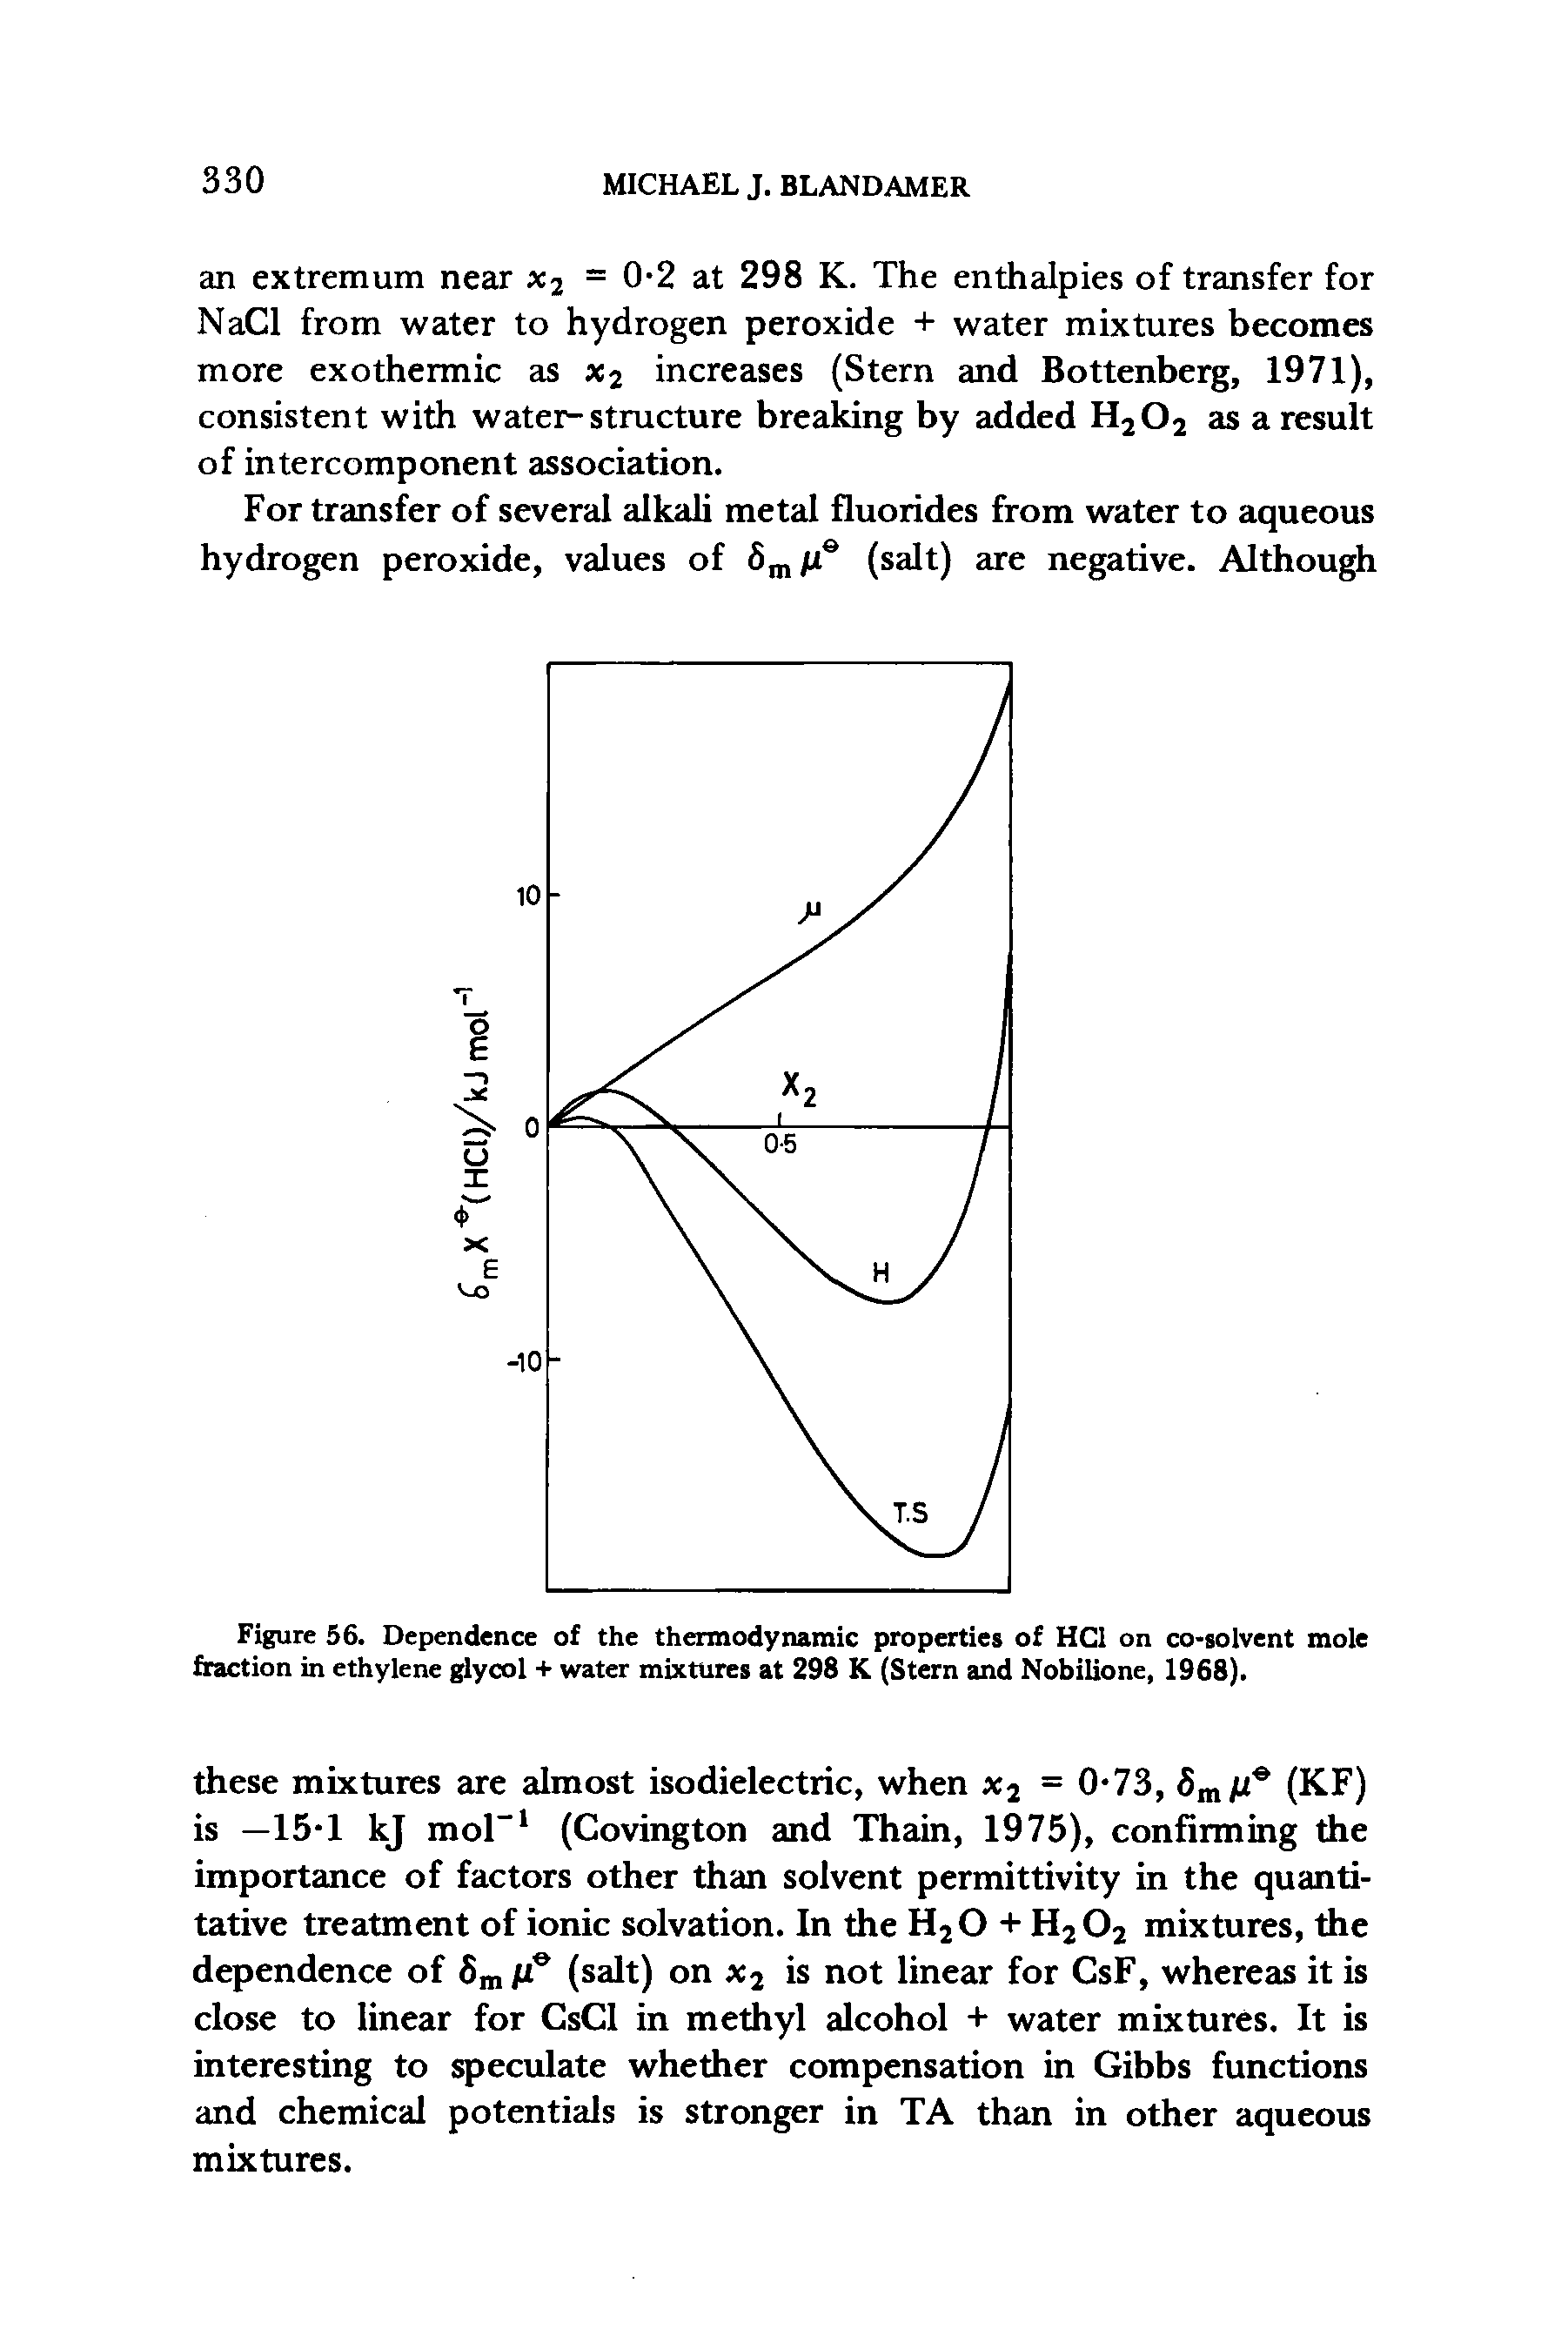 Figure 56. Dependence of the thermodynamic properties of HC1 on co-solvent mole fraction in ethylene glycol + water mixtures at 298 K (Stern and Nobilione, 1968).